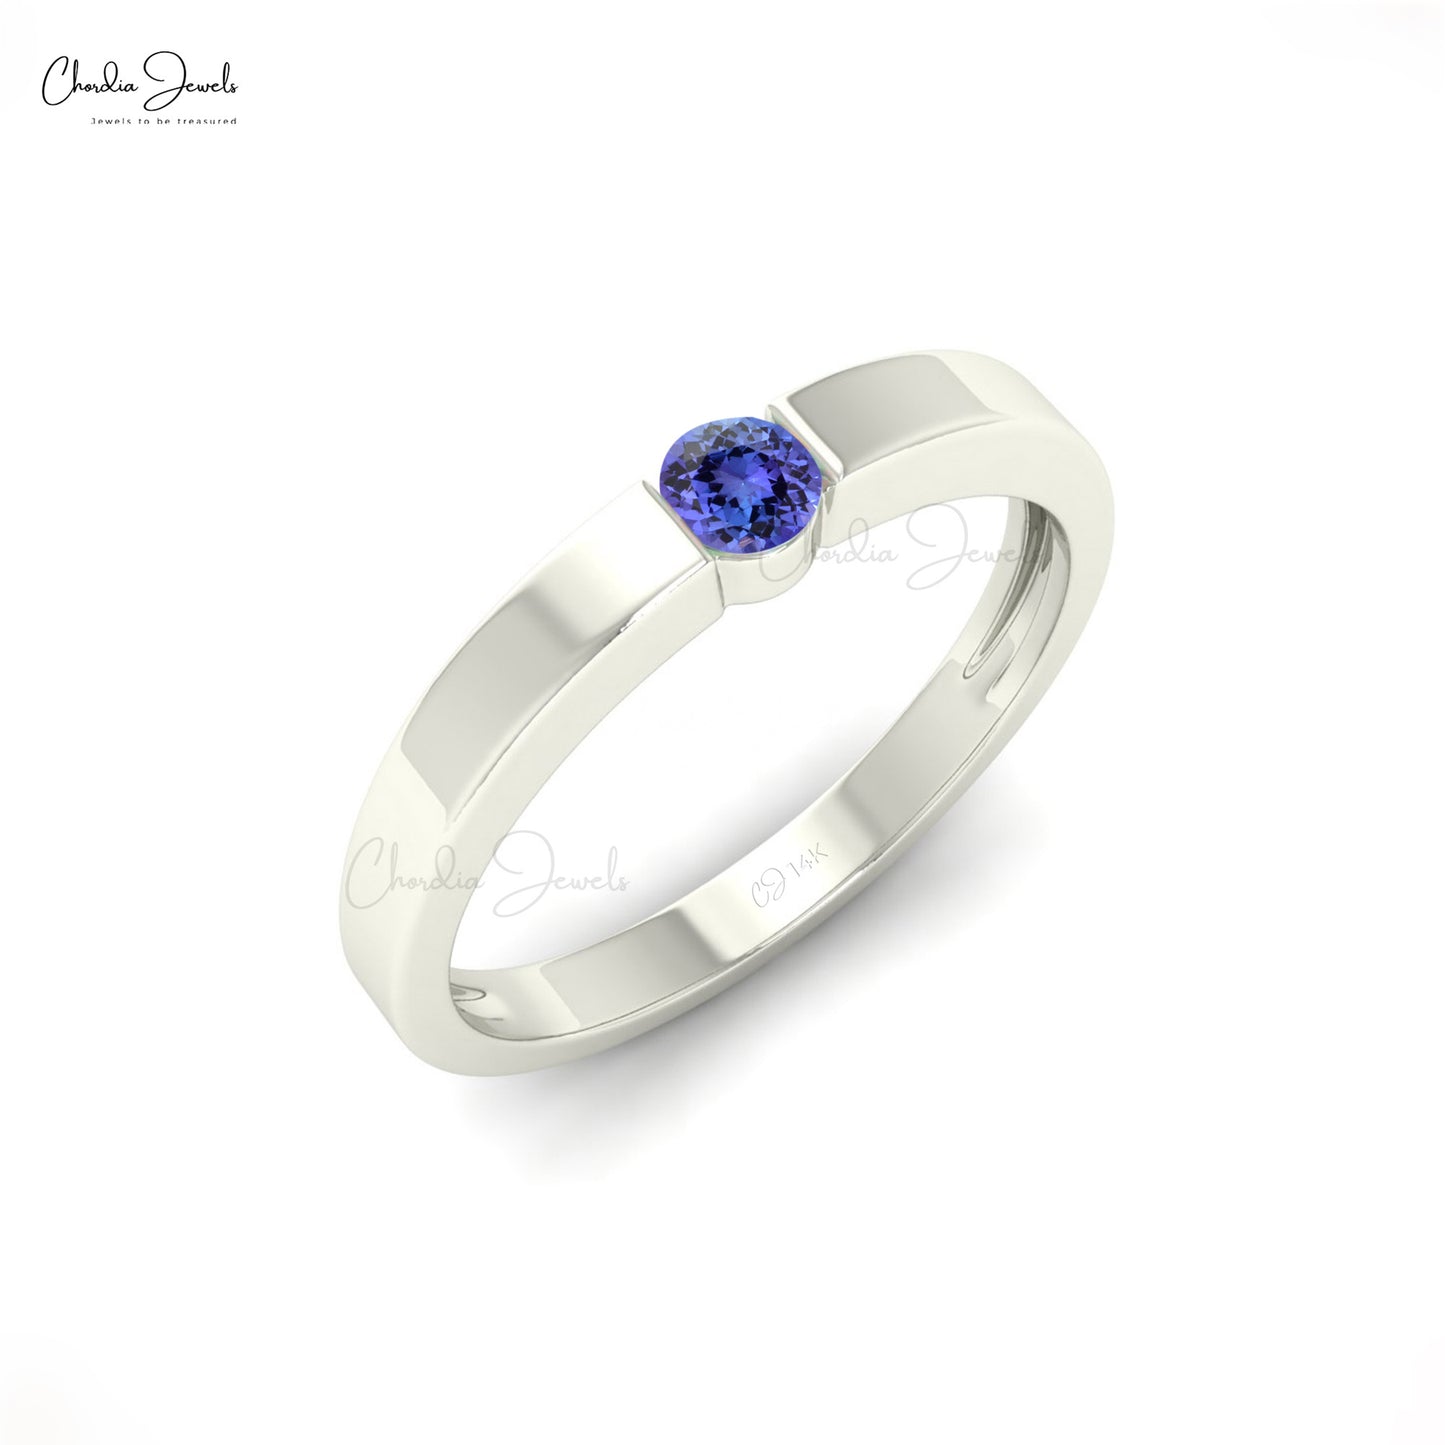 Solitaire Ring In Real 14k Gold Natural 0.11ct Tanzanite Gemstone Dainty Anniversary Ring